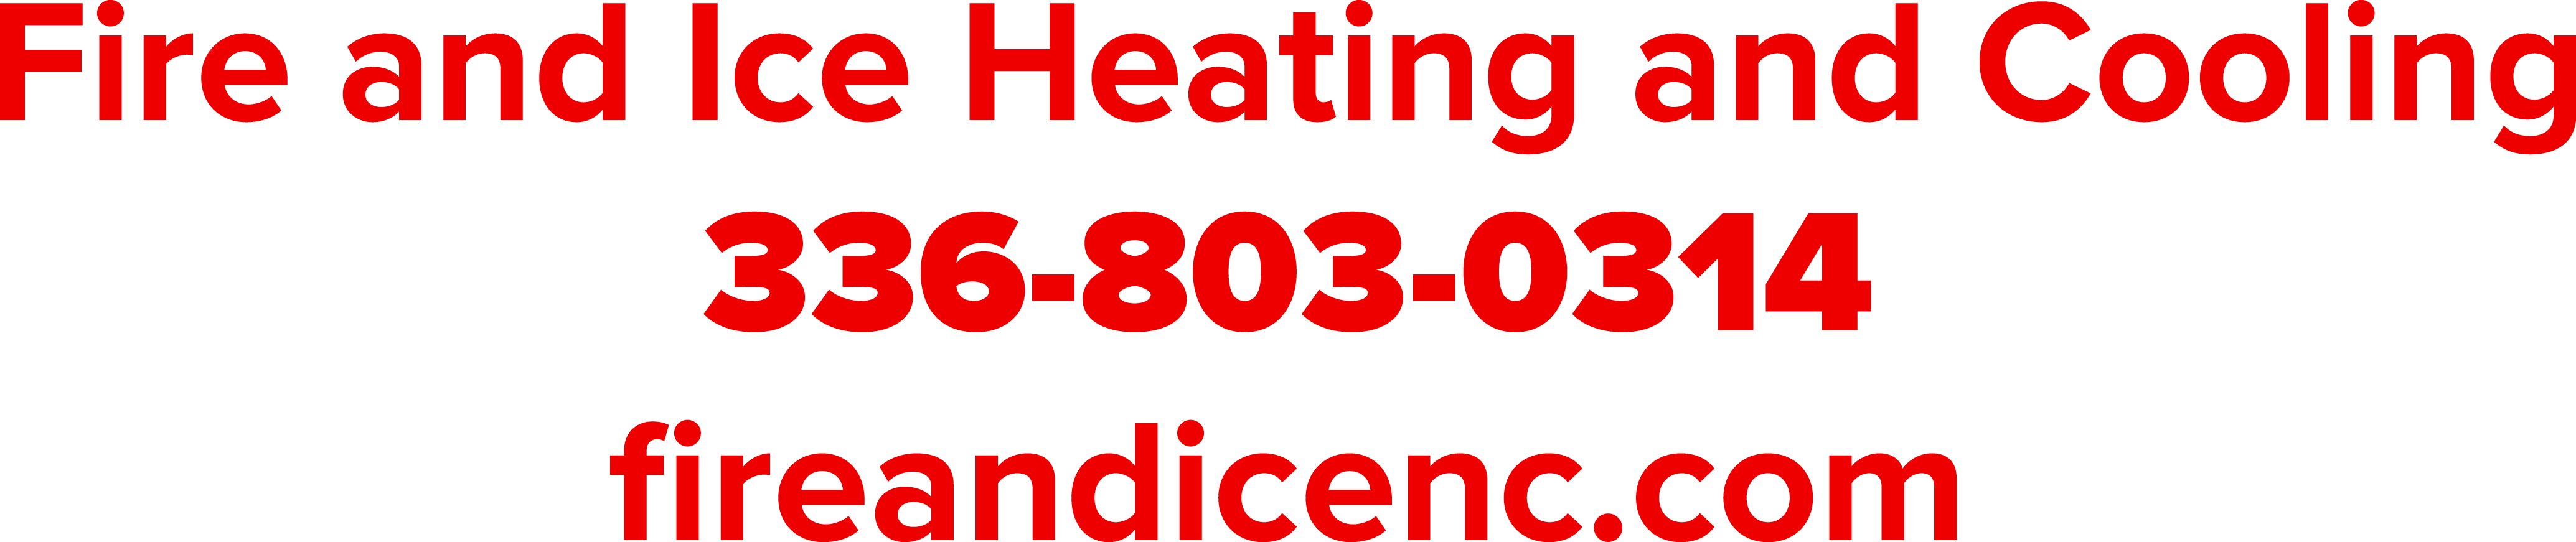 Fire and Ice Heating and Cooling Logo